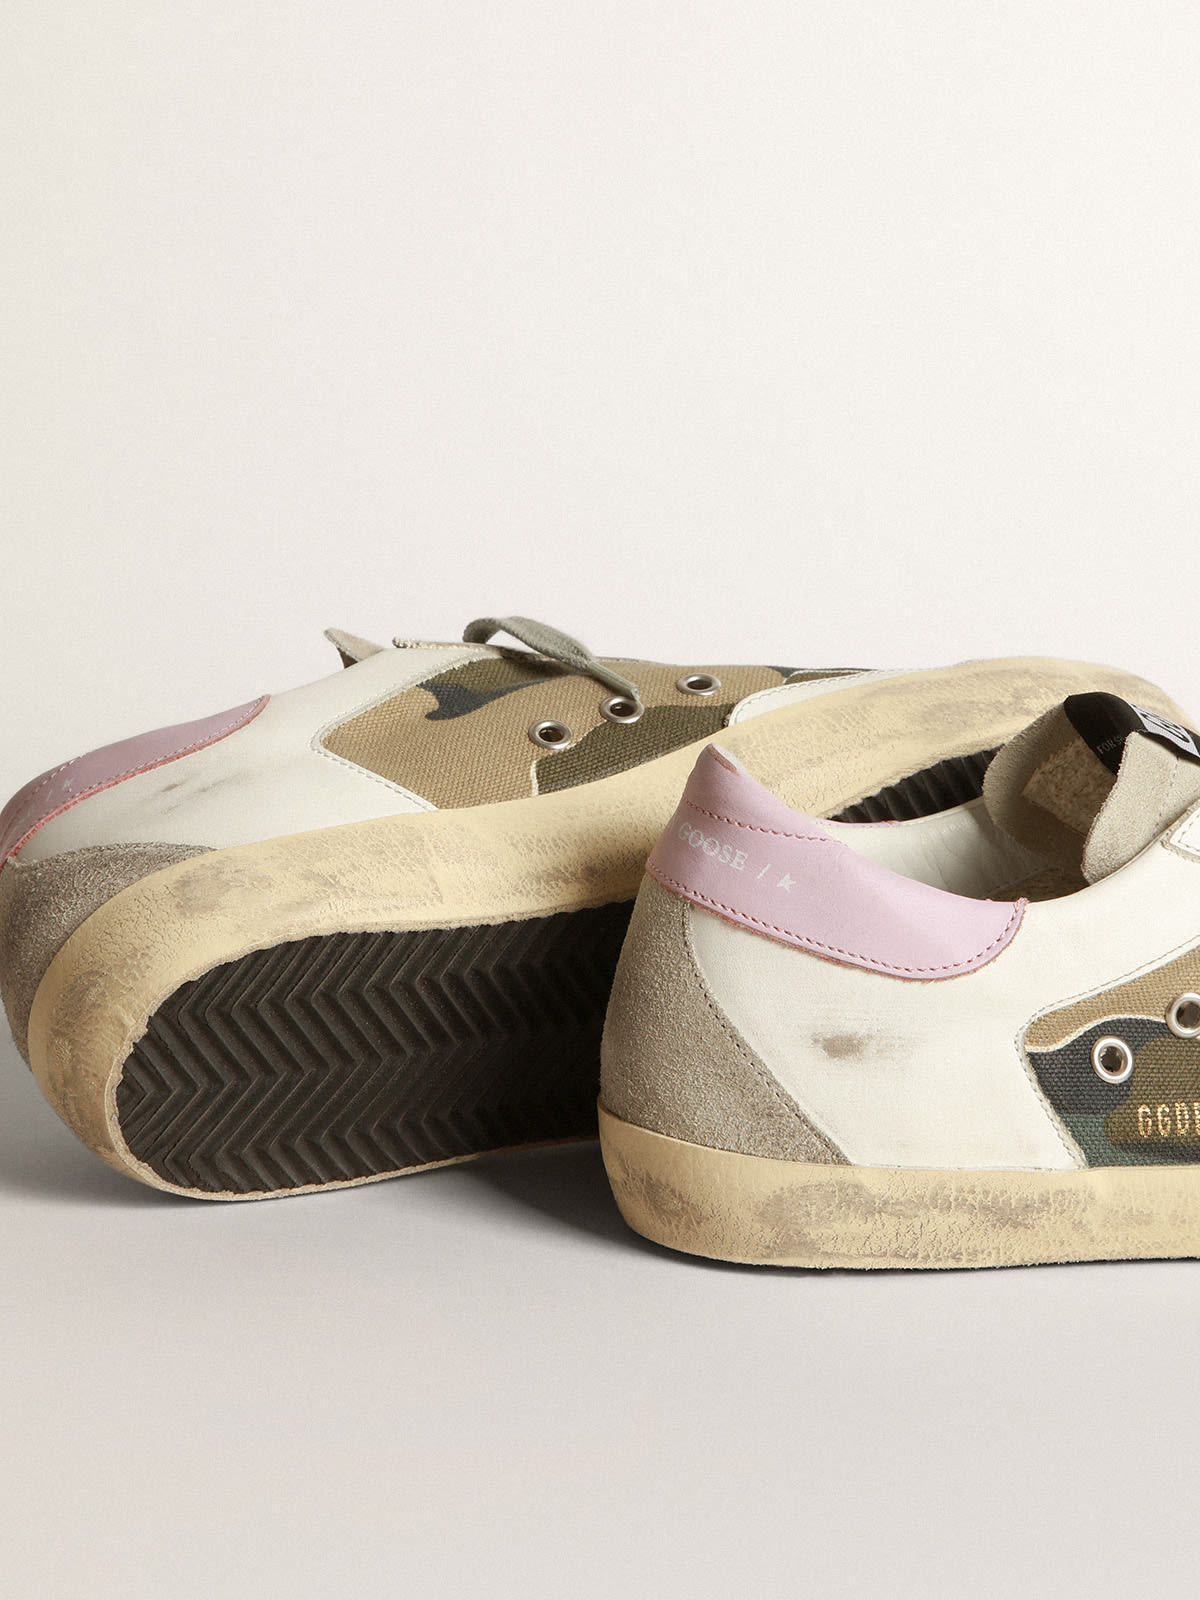 Golden Goose - Camouflage Super-Star sneakers with glittery star and pink heel tab in 